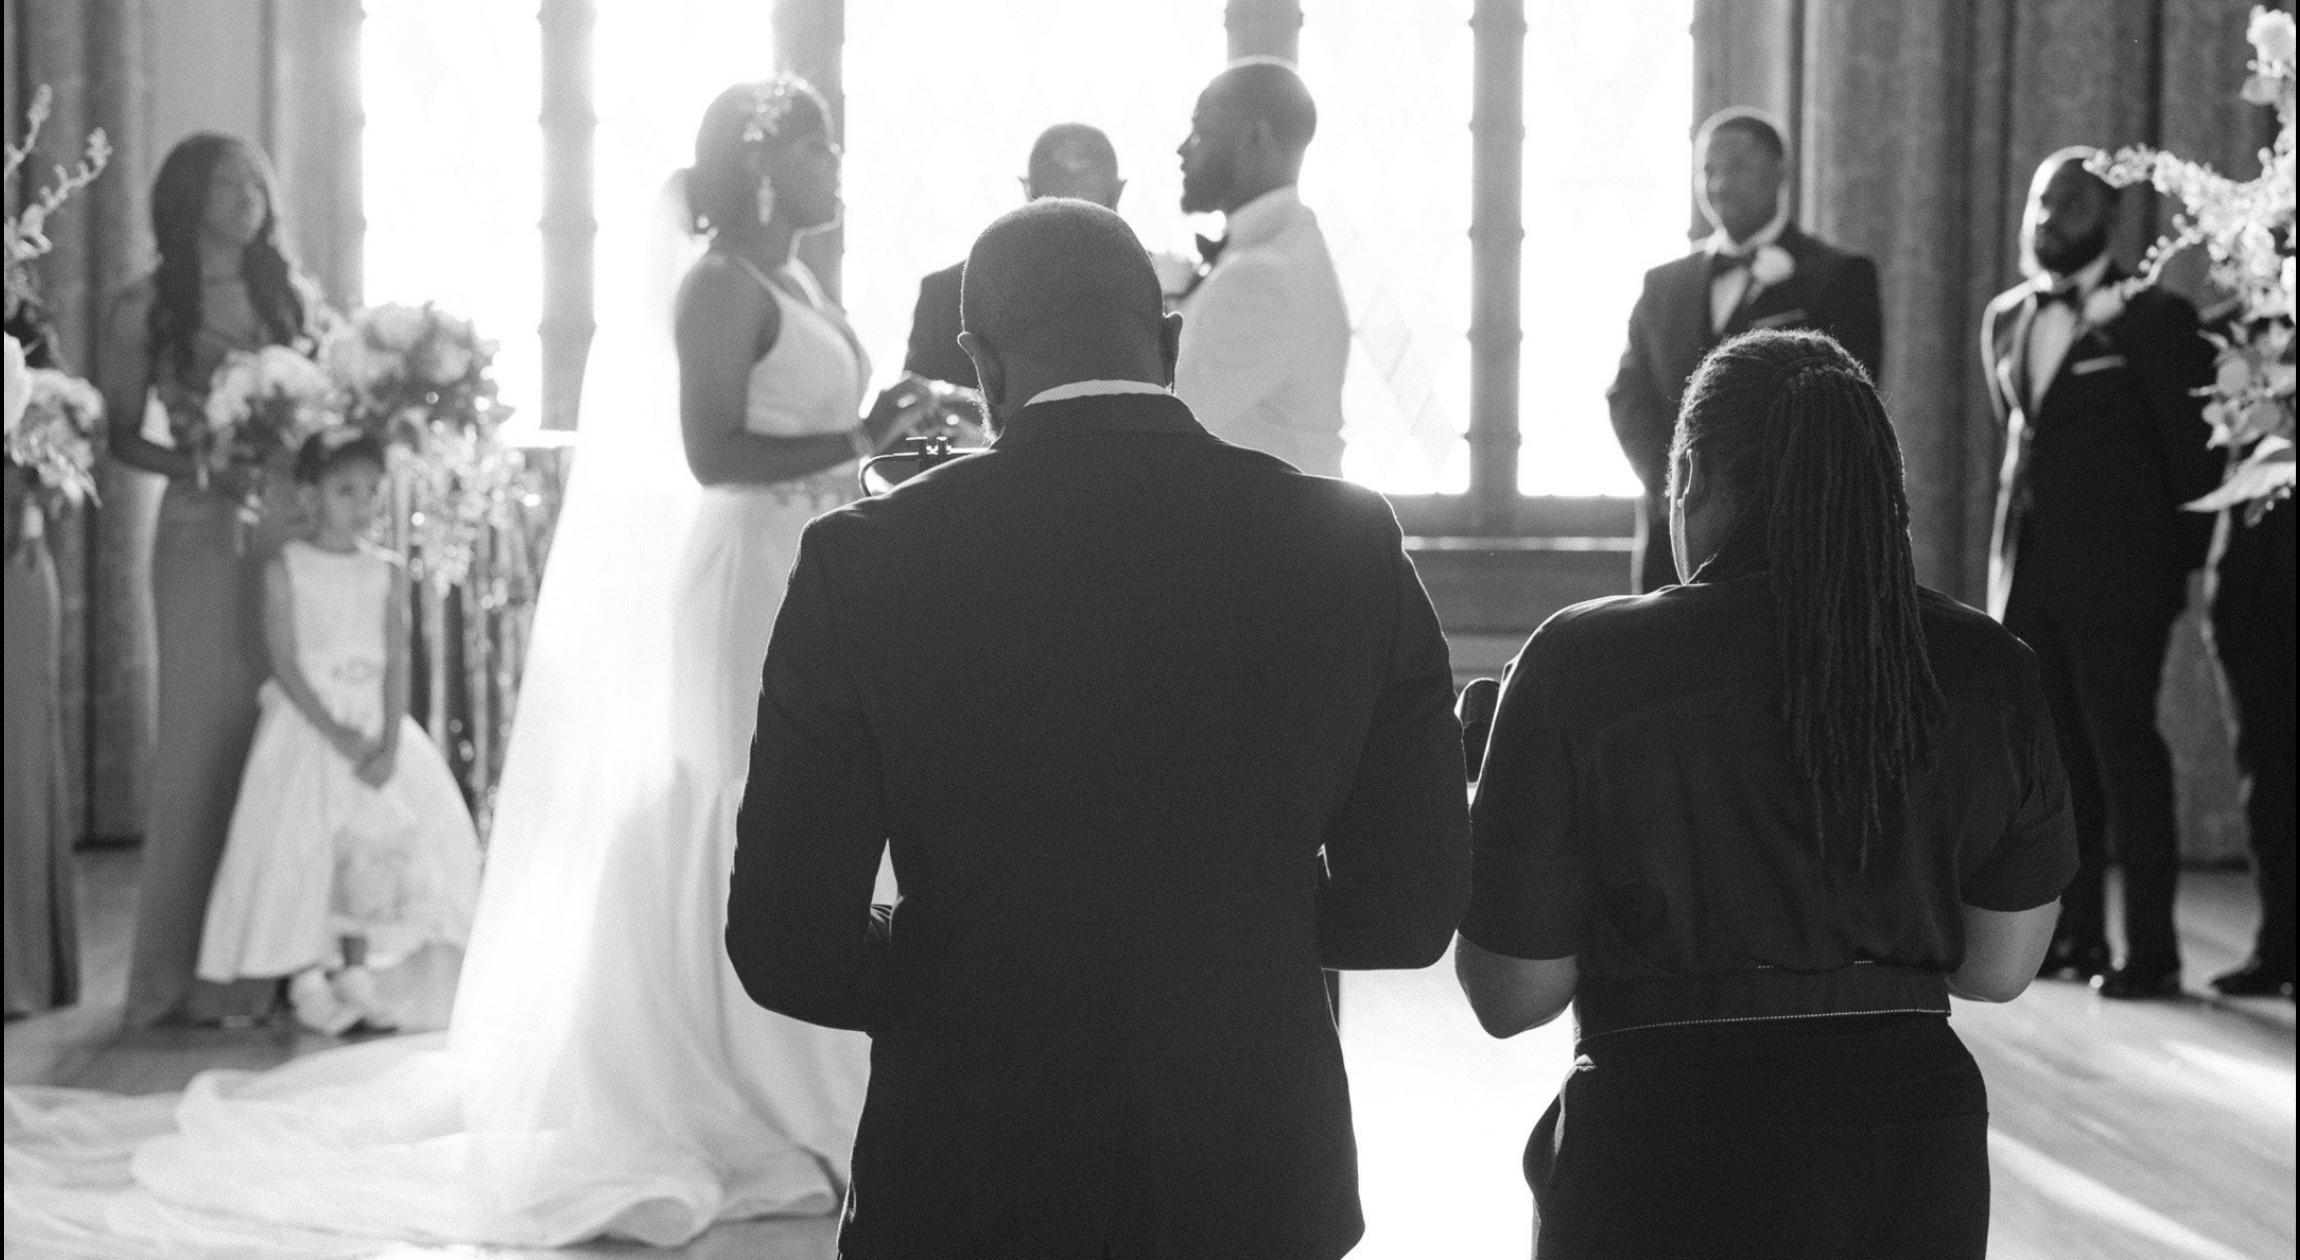 The back of a Black couple capturing the wedding of another Black couple